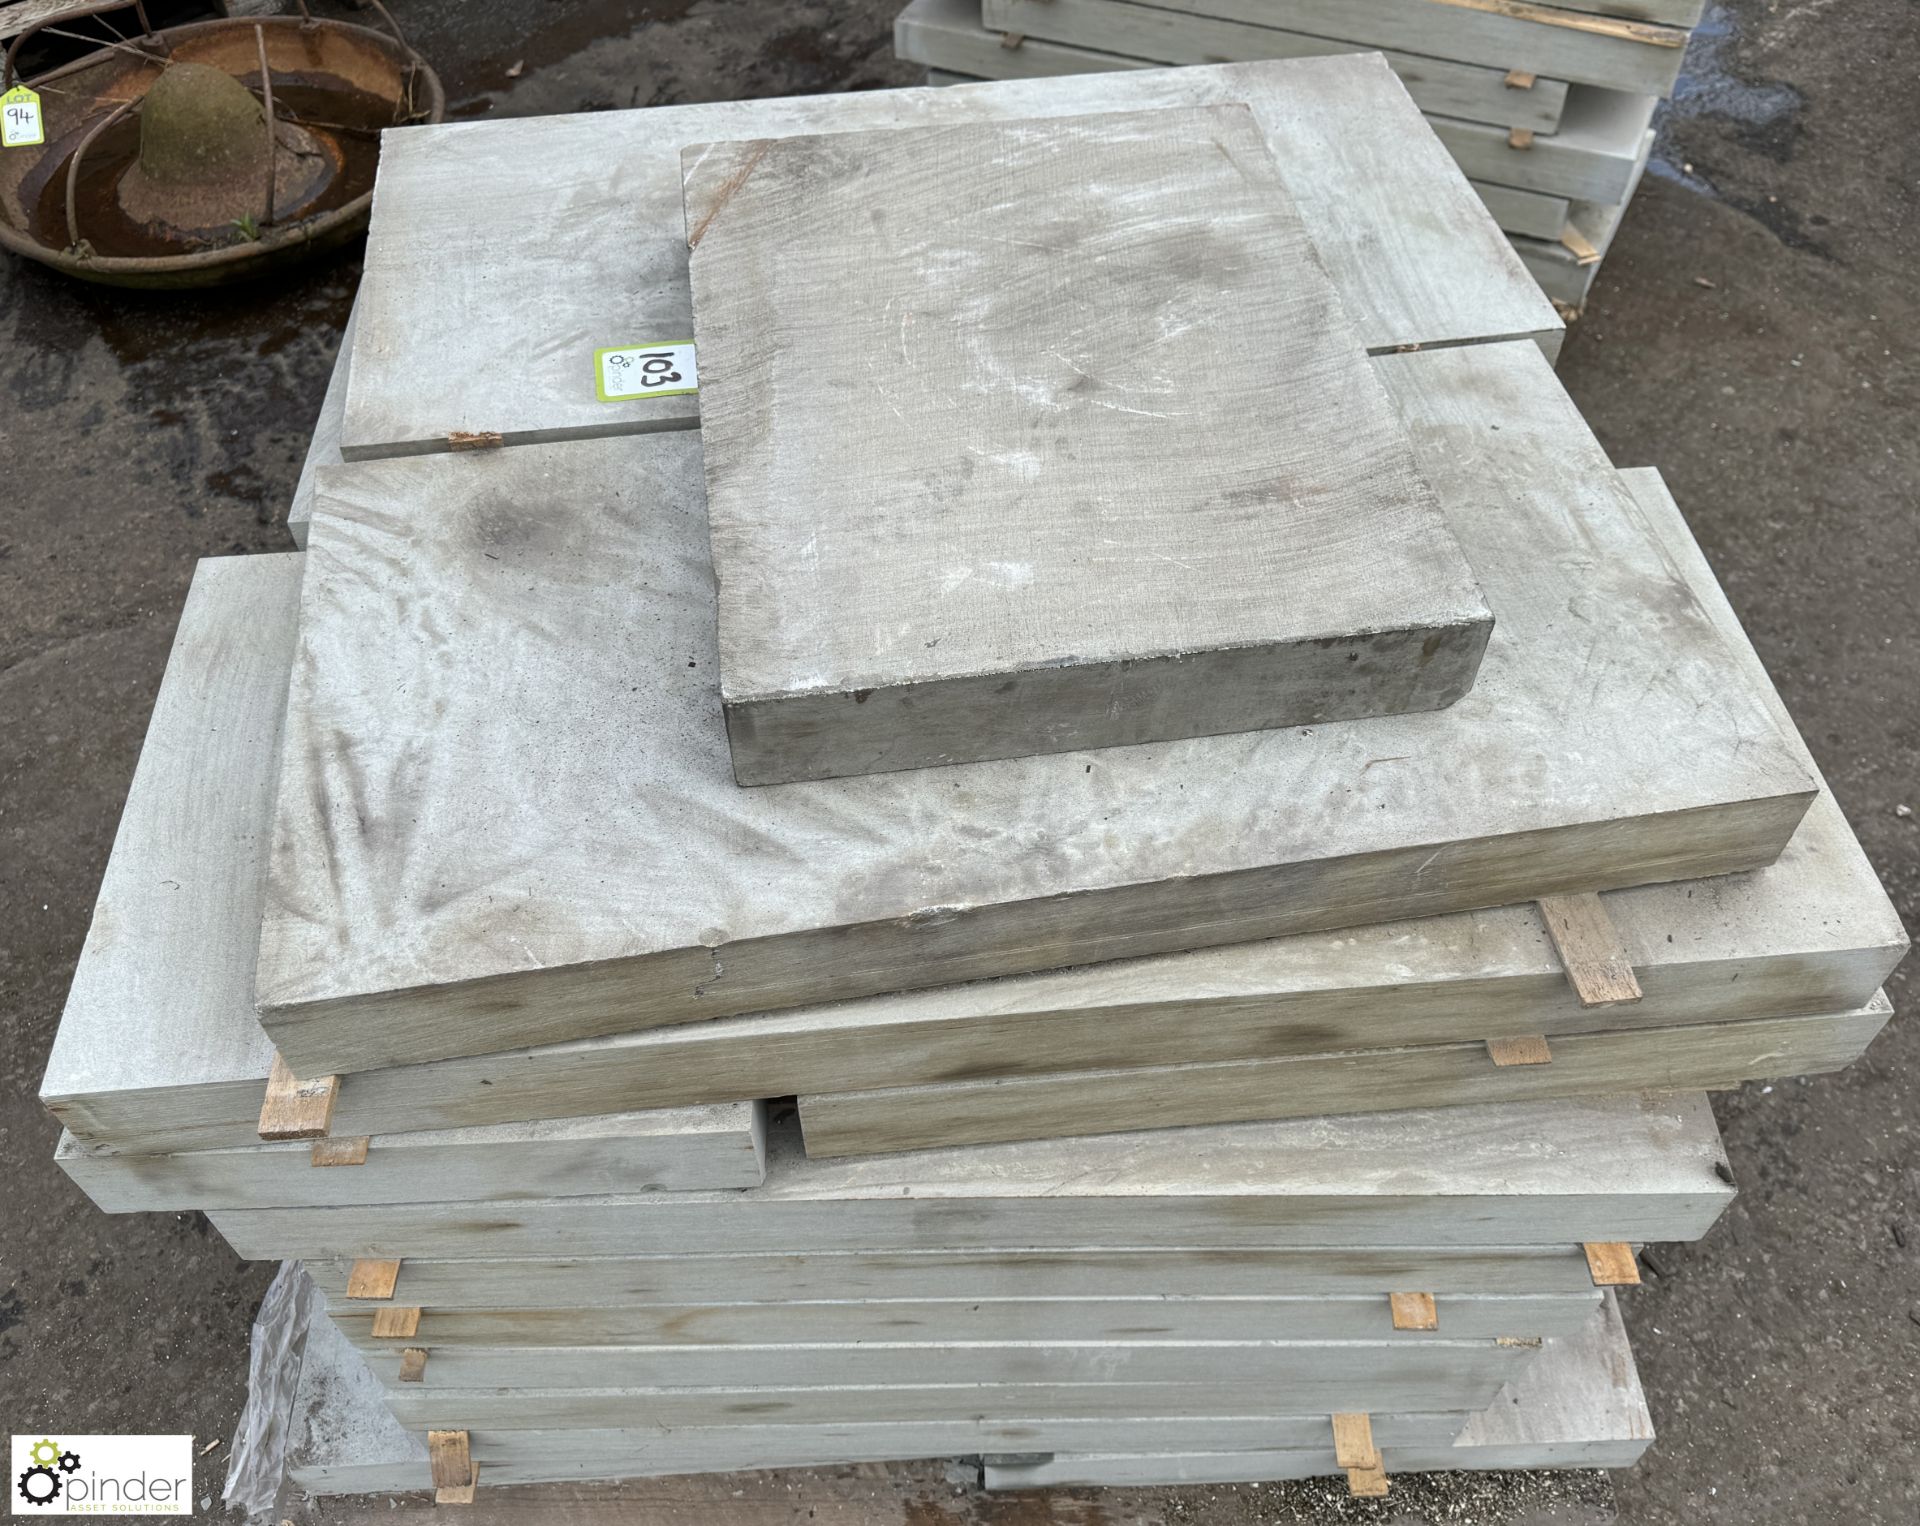 Pallet Sandstone Slabs from Millstone grit, various lengths x 450mm x 75mm - Image 5 of 6